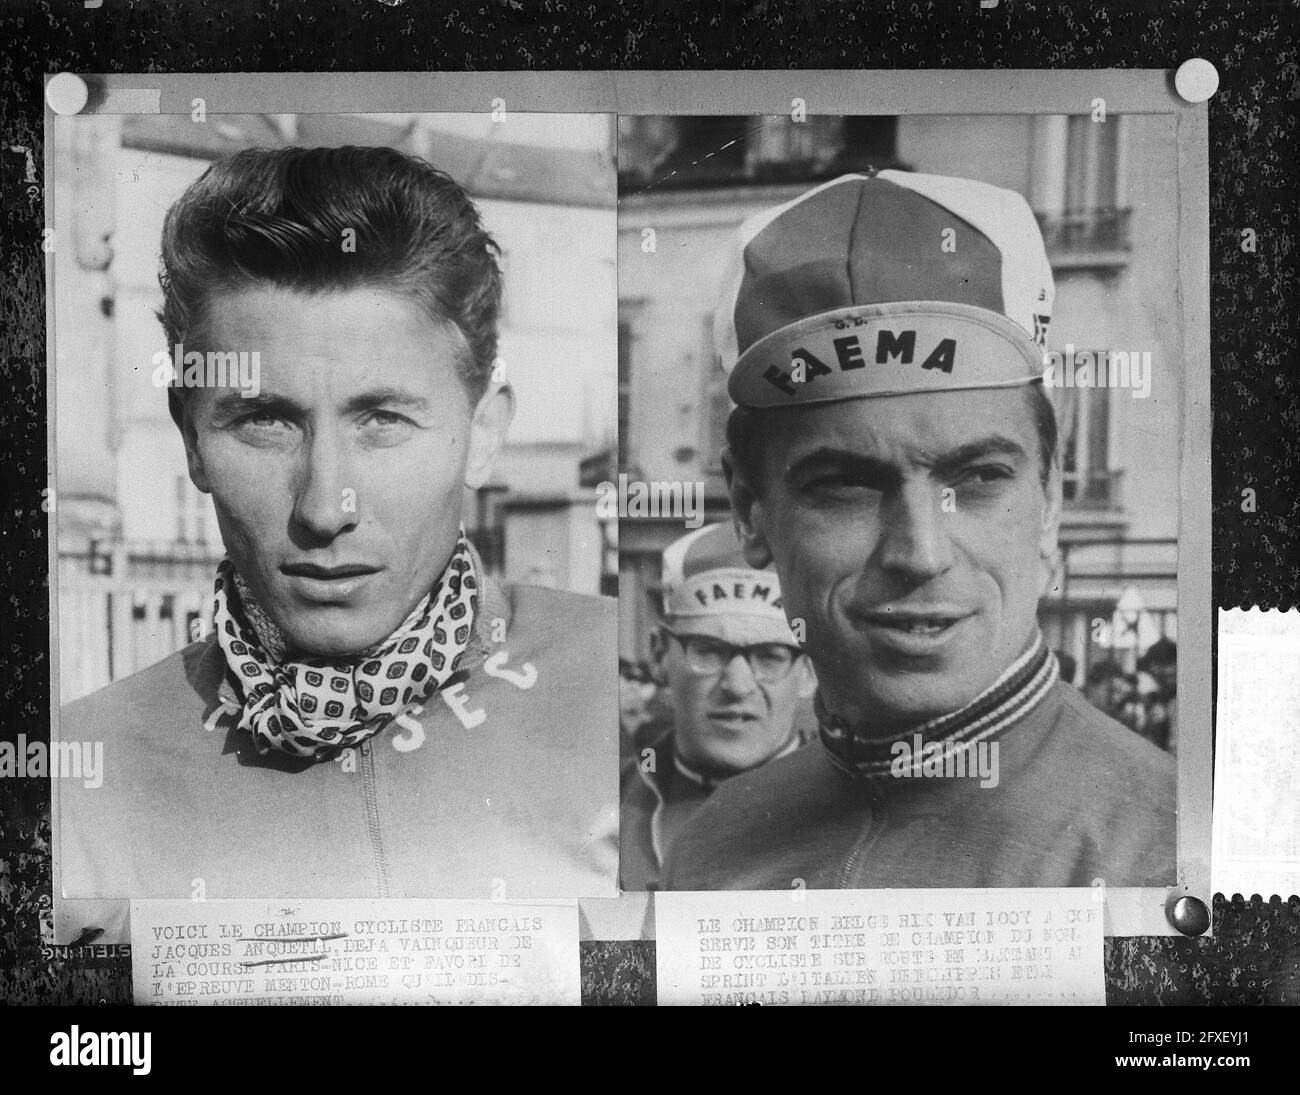 Tour de France 1962 ( Jacques Anquetil, Rik van Looy ), June 20, 1962, The Netherlands, 20th century press agency photo, news to remember, documentary, historic photography 1945-1990, visual stories, human history of the Twentieth Century, capturing moments in time Stock Photo